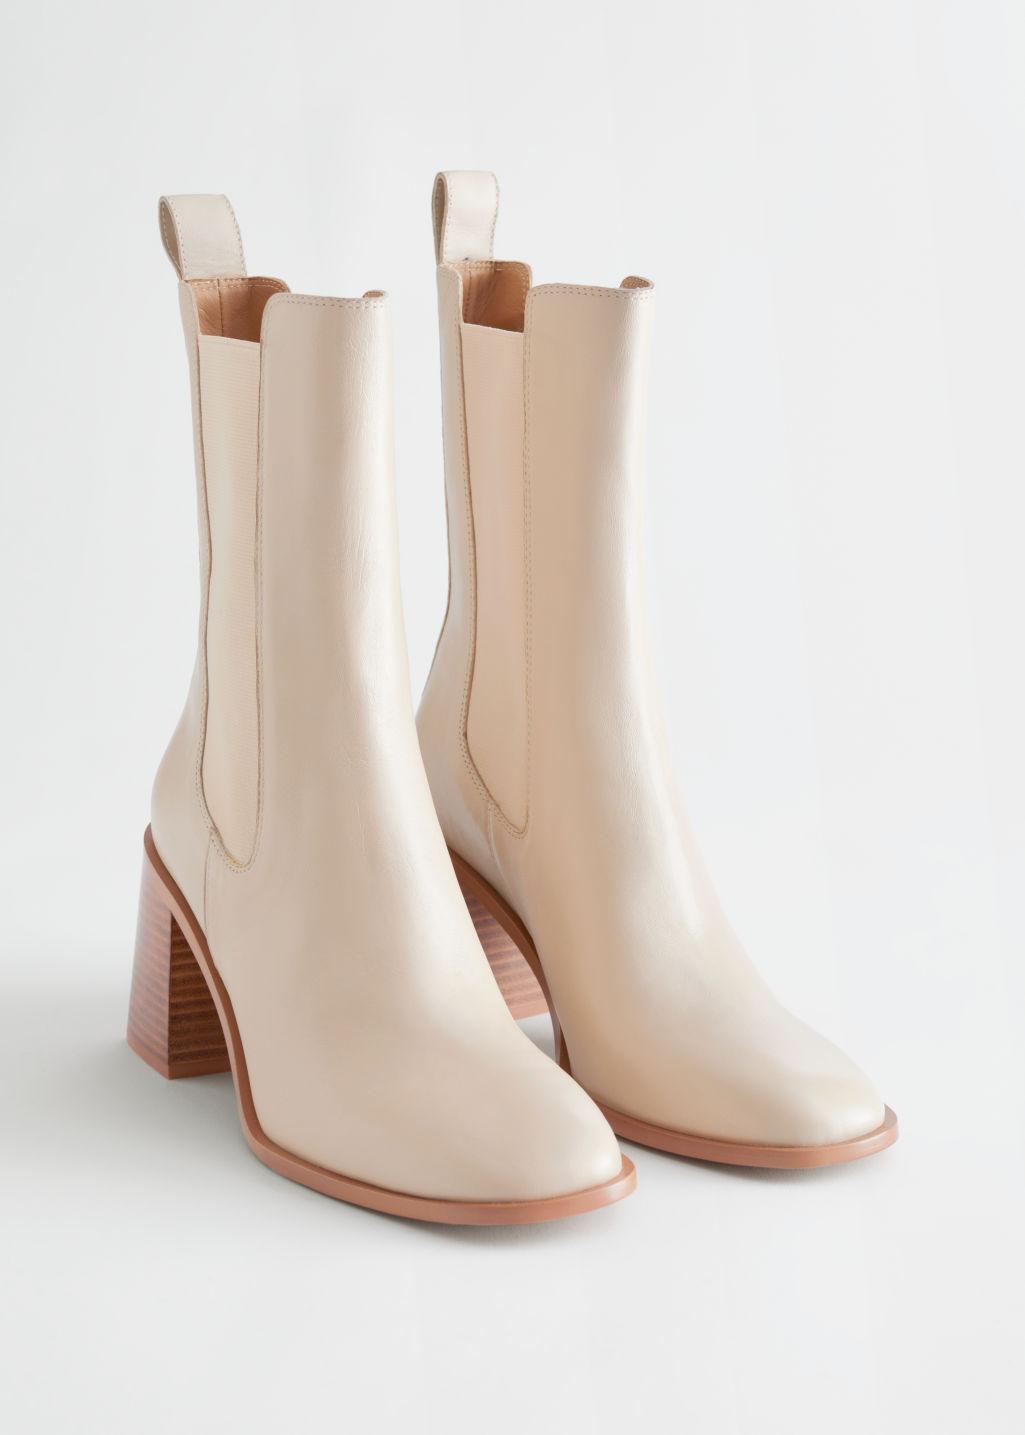 & Other Stories Heeled Leather Chelsea Boots in Beige (Natural) - Lyst